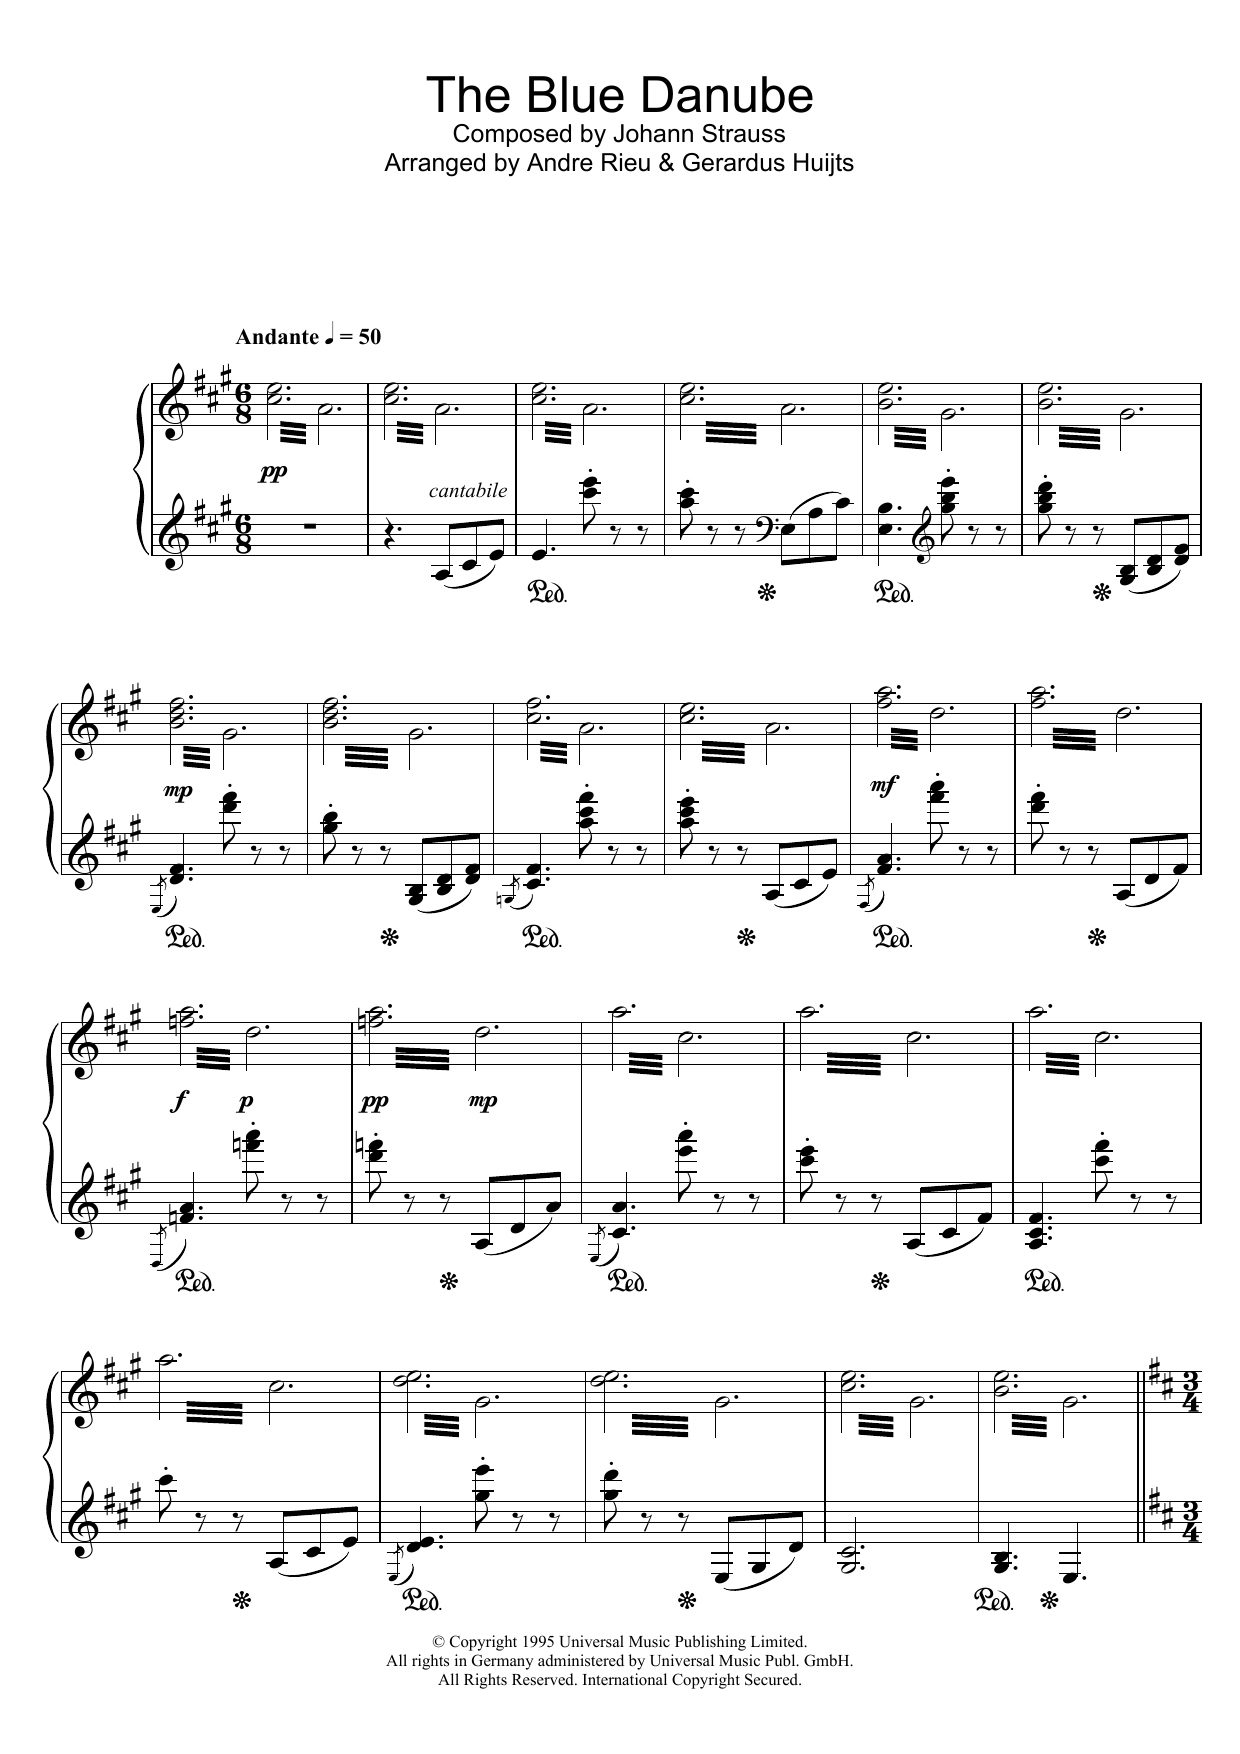 Andre Rieu The Blue Danube sheet music notes and chords. Download Printable PDF.